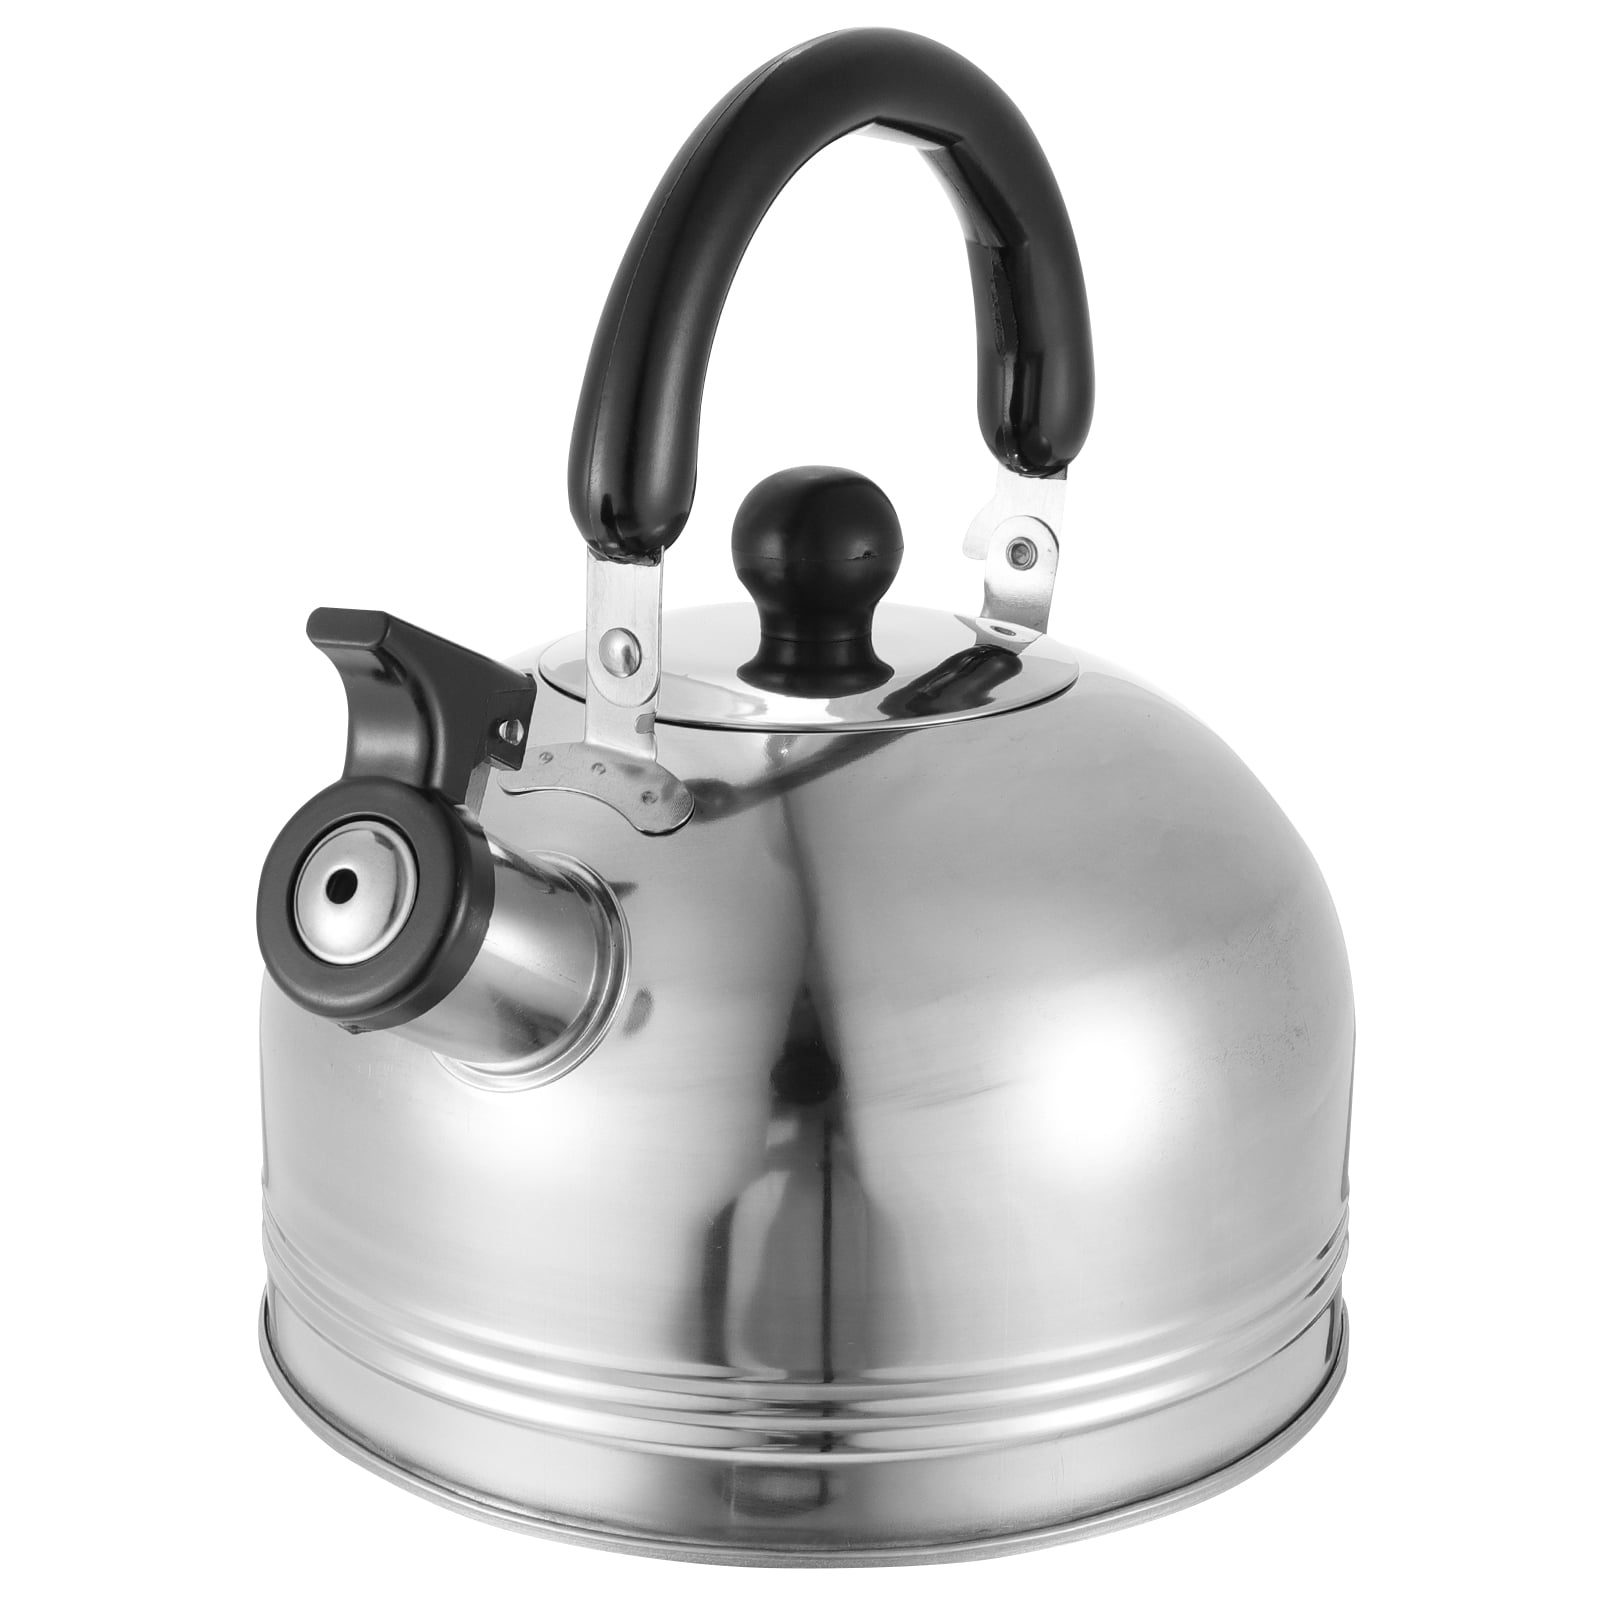 DOITOOL Whistling Tea Kettle Stainless Steel Stovetop Whistling Tea Pot Water Kettle for Home Kitchen Camping Hiking 